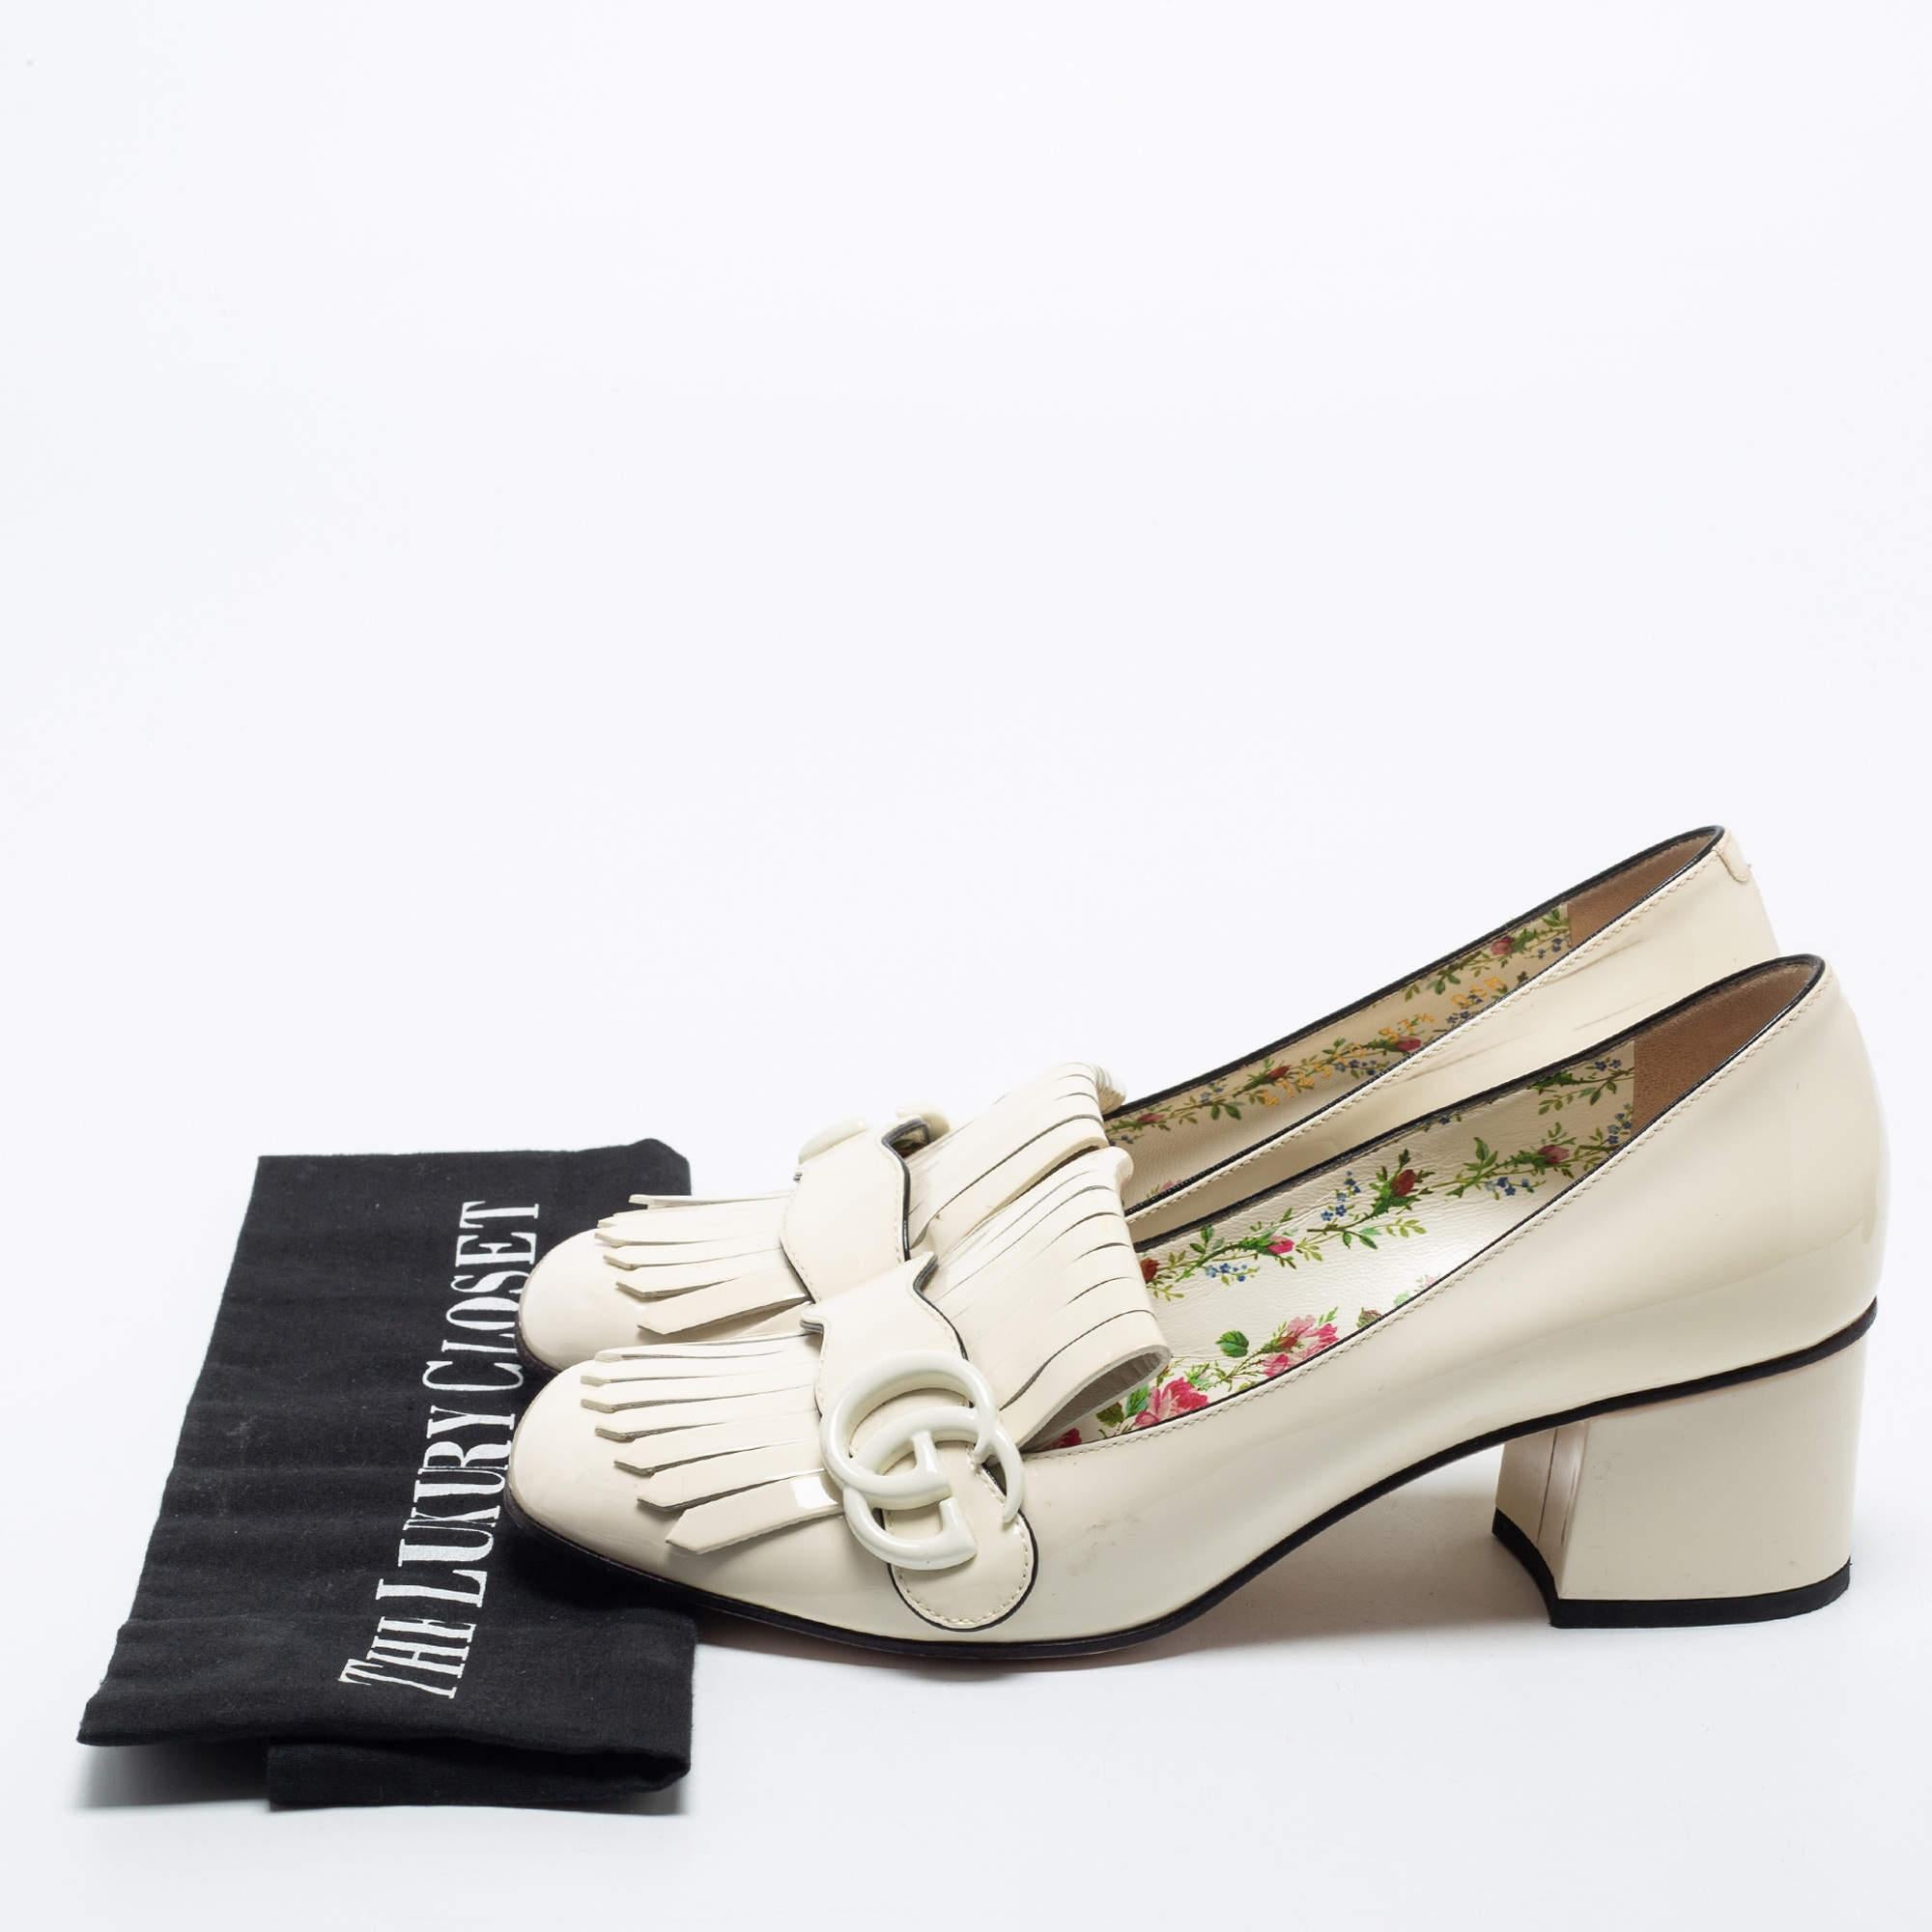 Gucci Cream Patent Leather Double G Fringes Mid Heel Pumps Size 37.5 5